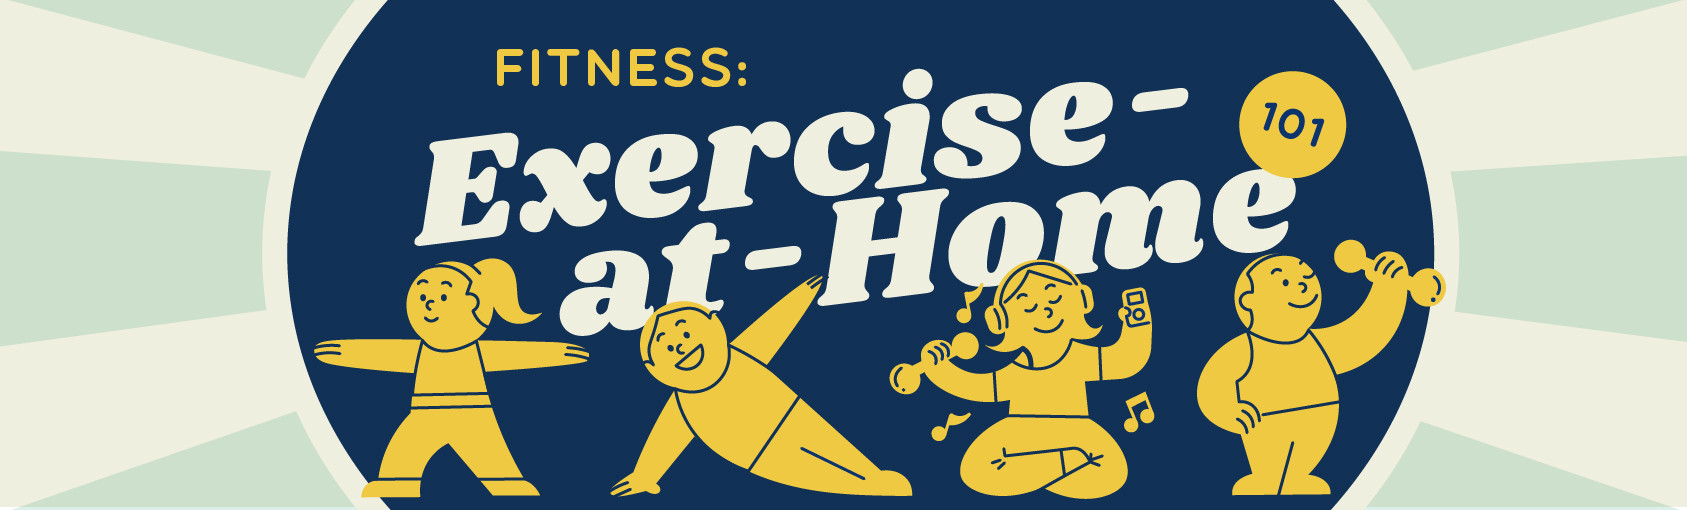 Fitness: Exercise-At-Home 101 banner